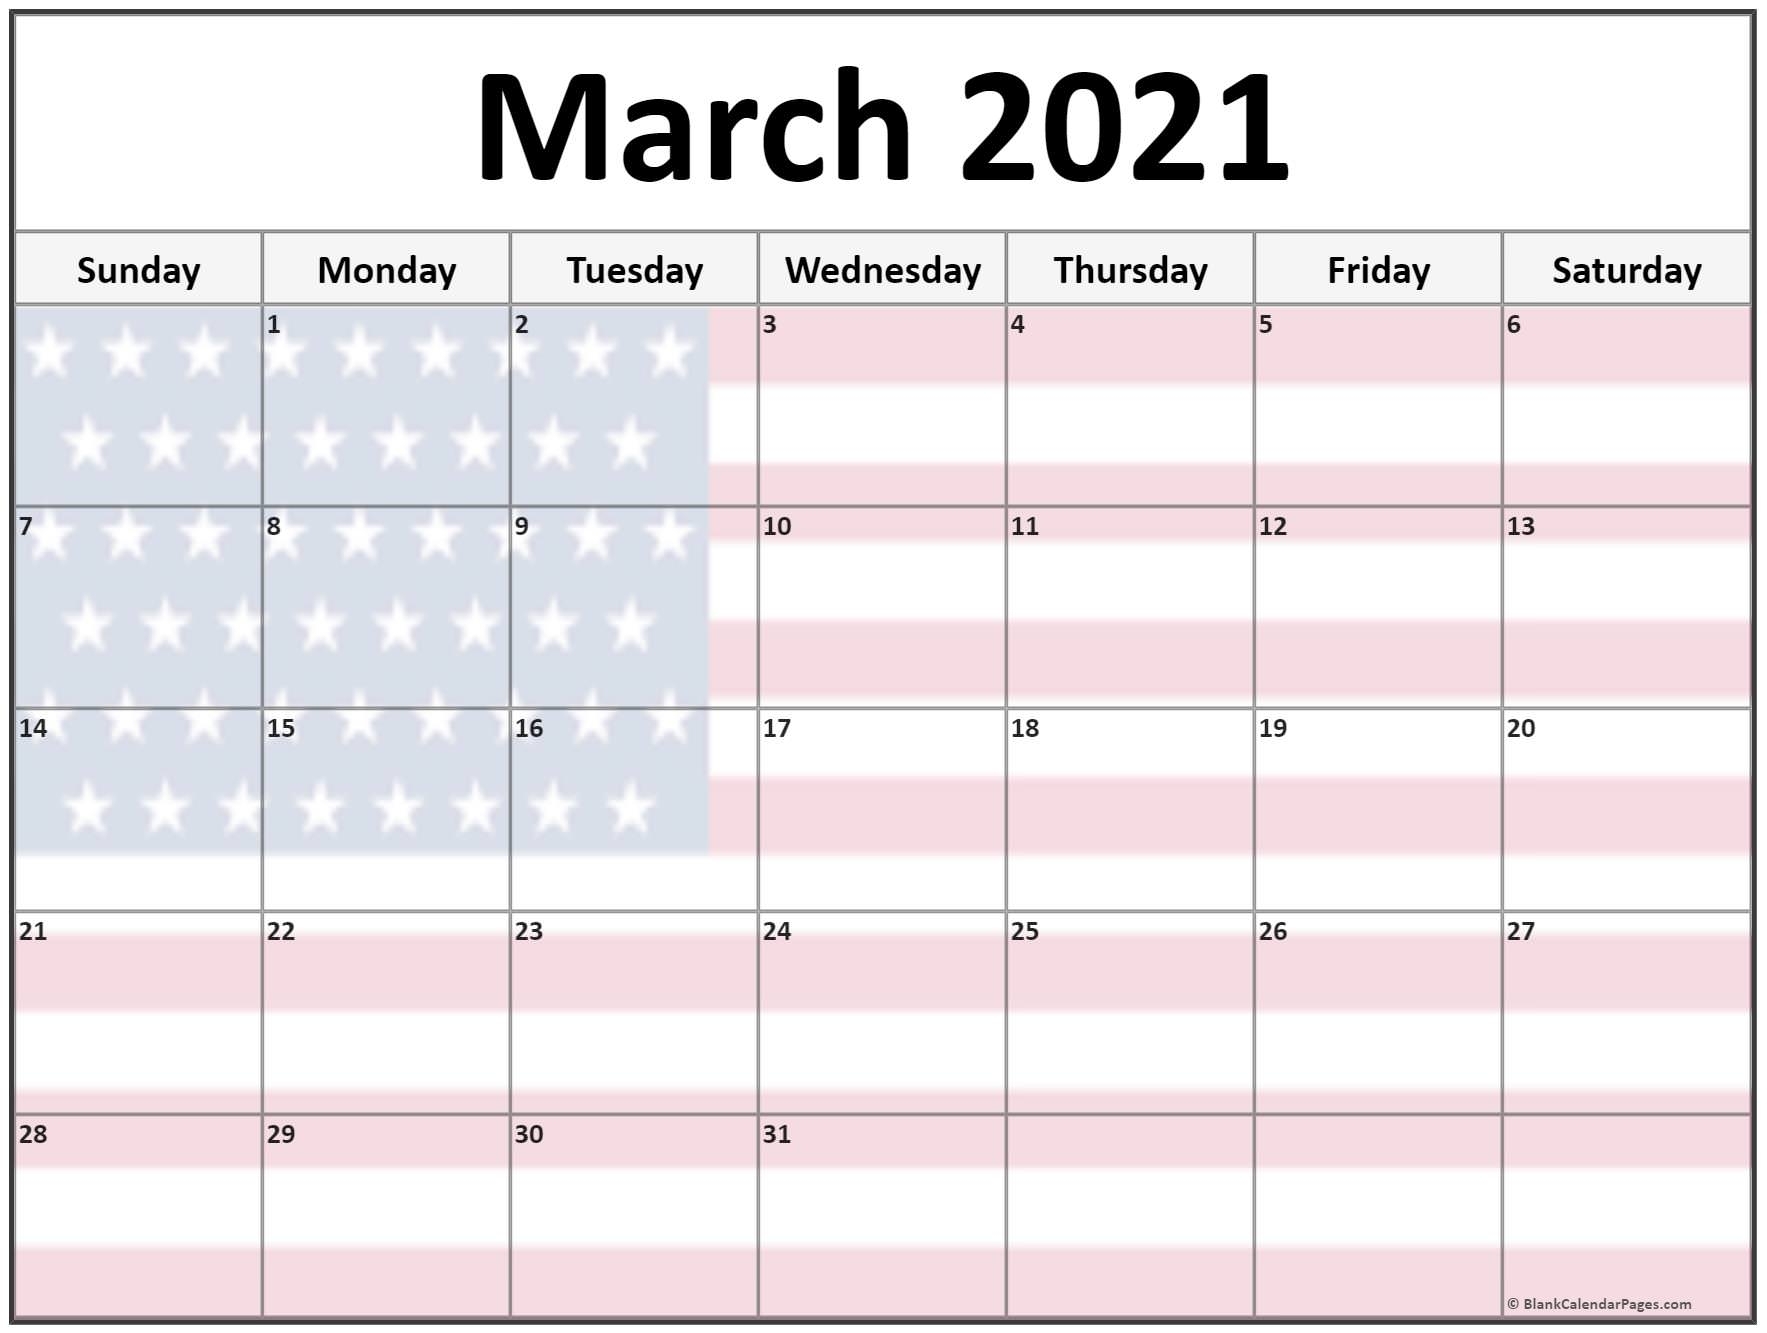 Collection Of March 2021 Photo Calendars With Image Filters.